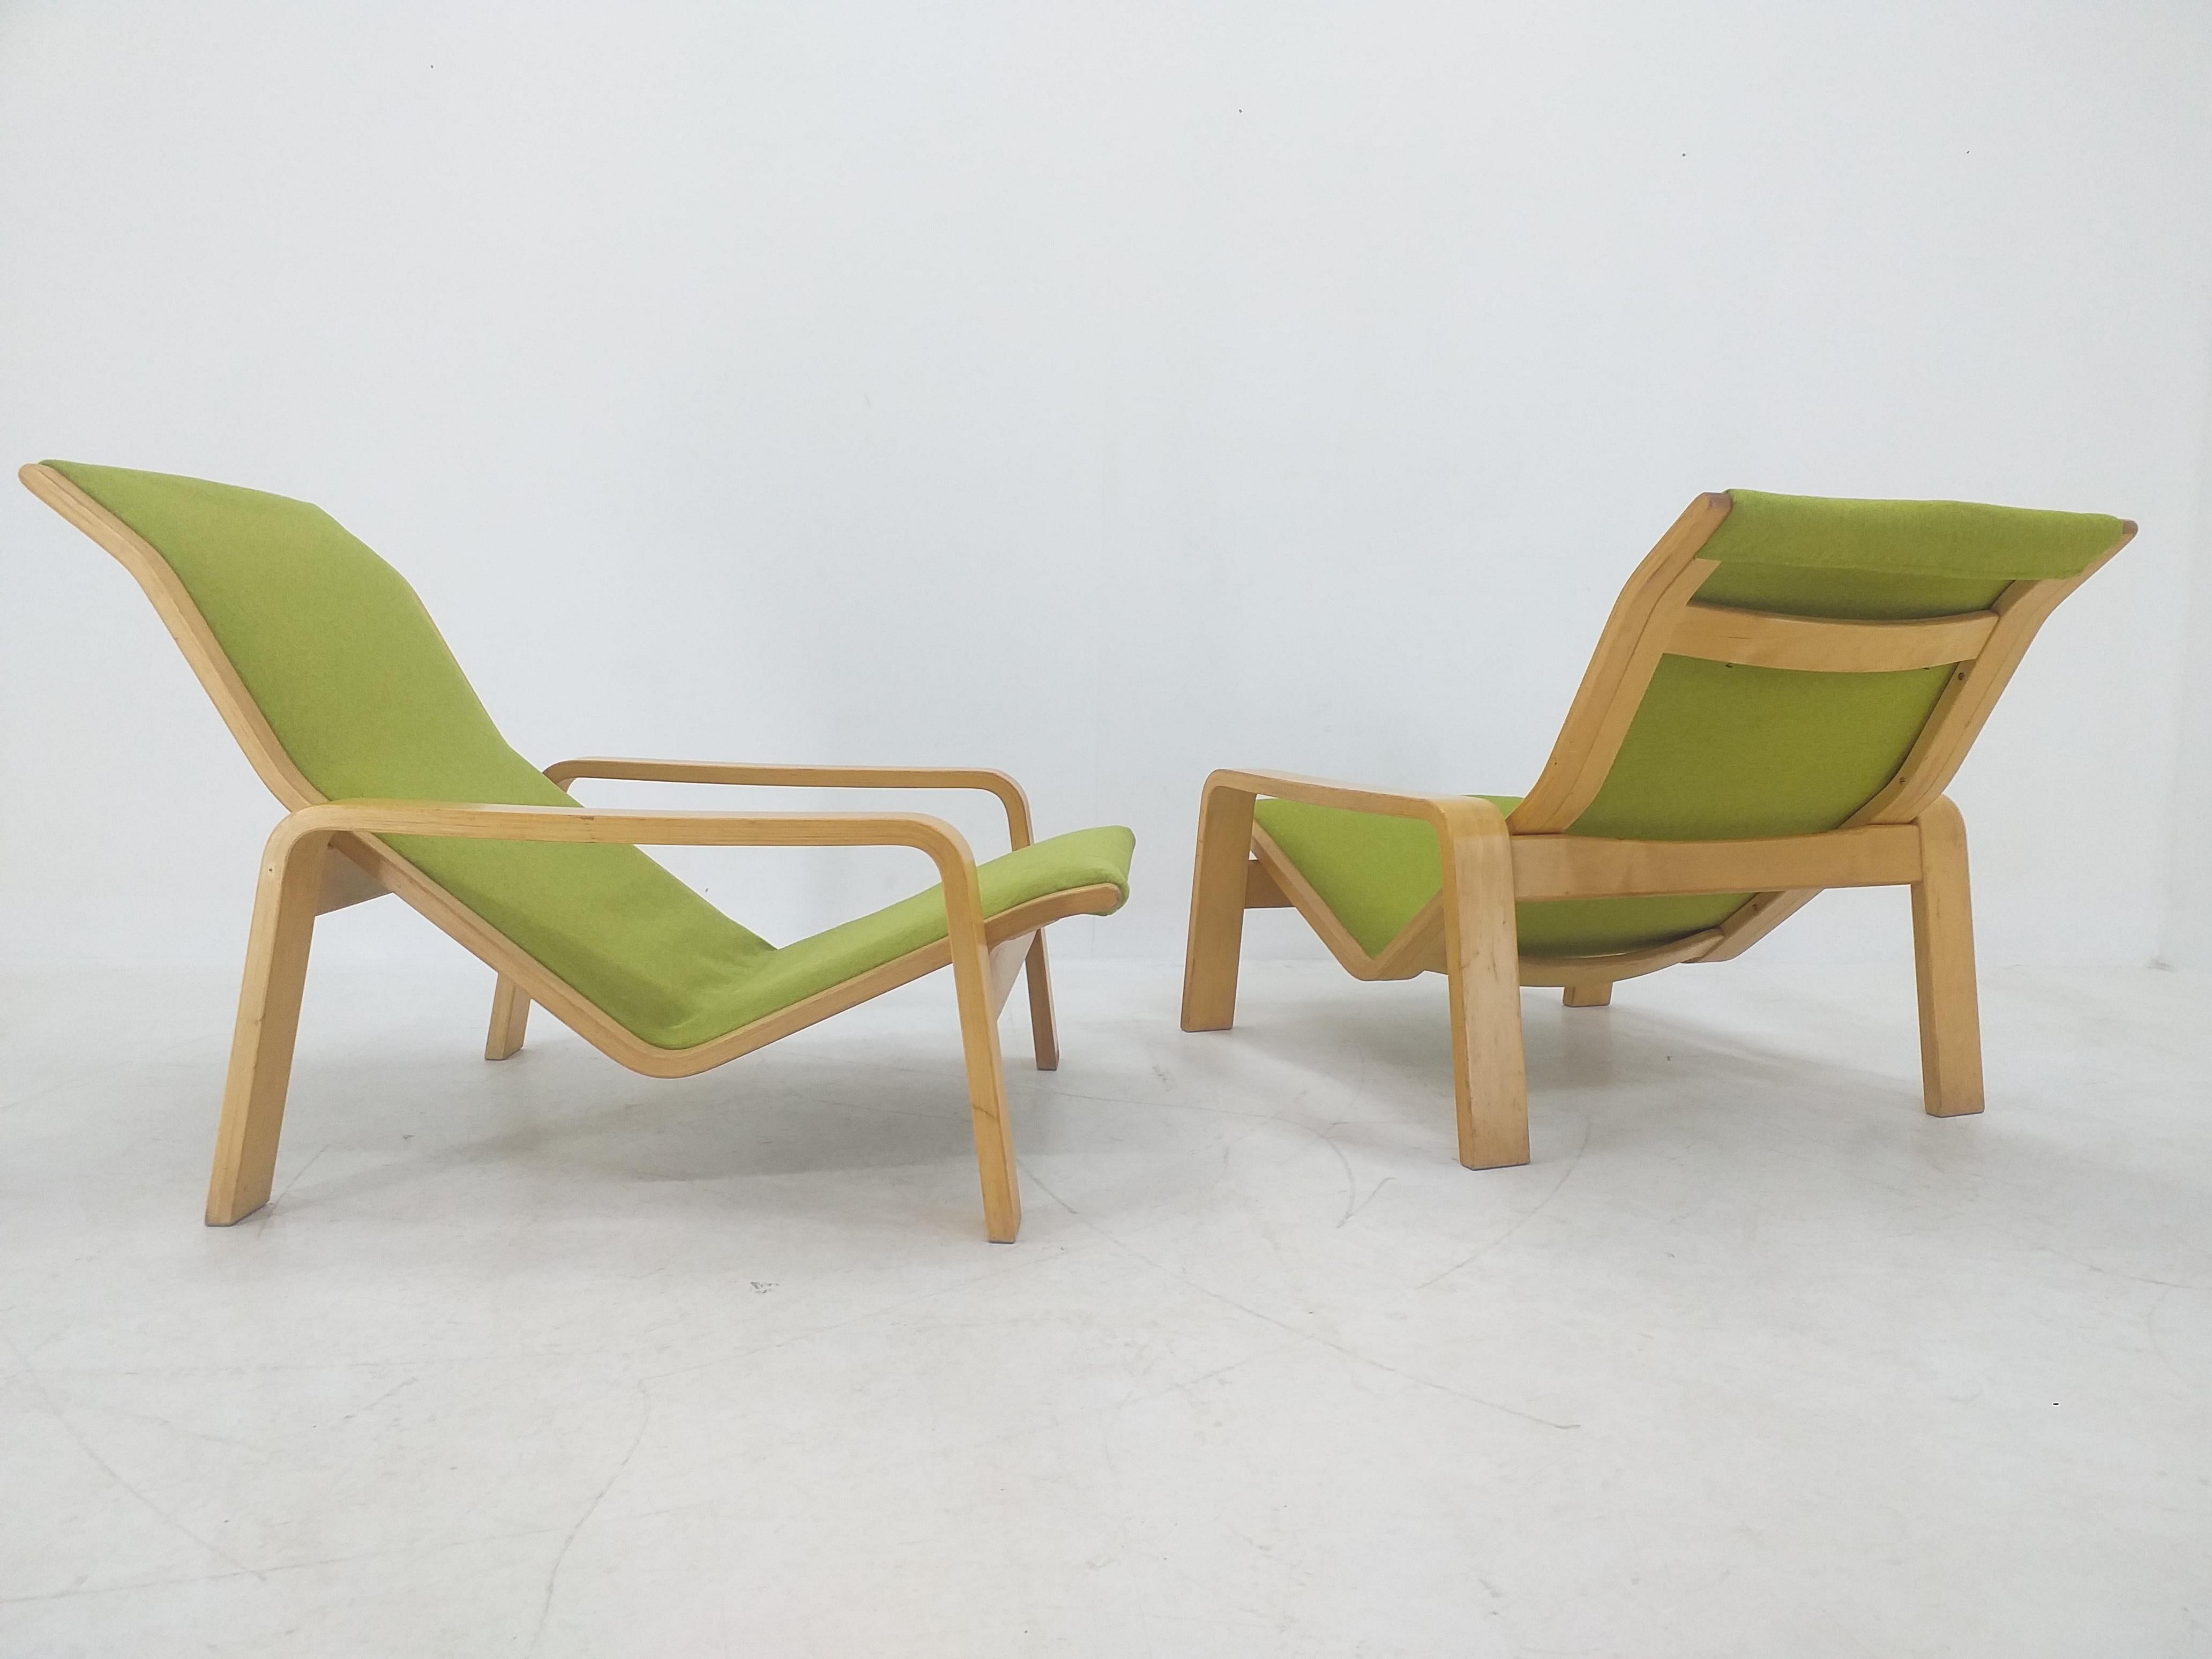 Pair of Lounge Chairs Pulkka, Ilmari Lappalainen for ASKO, Finland, 1970s For Sale 5